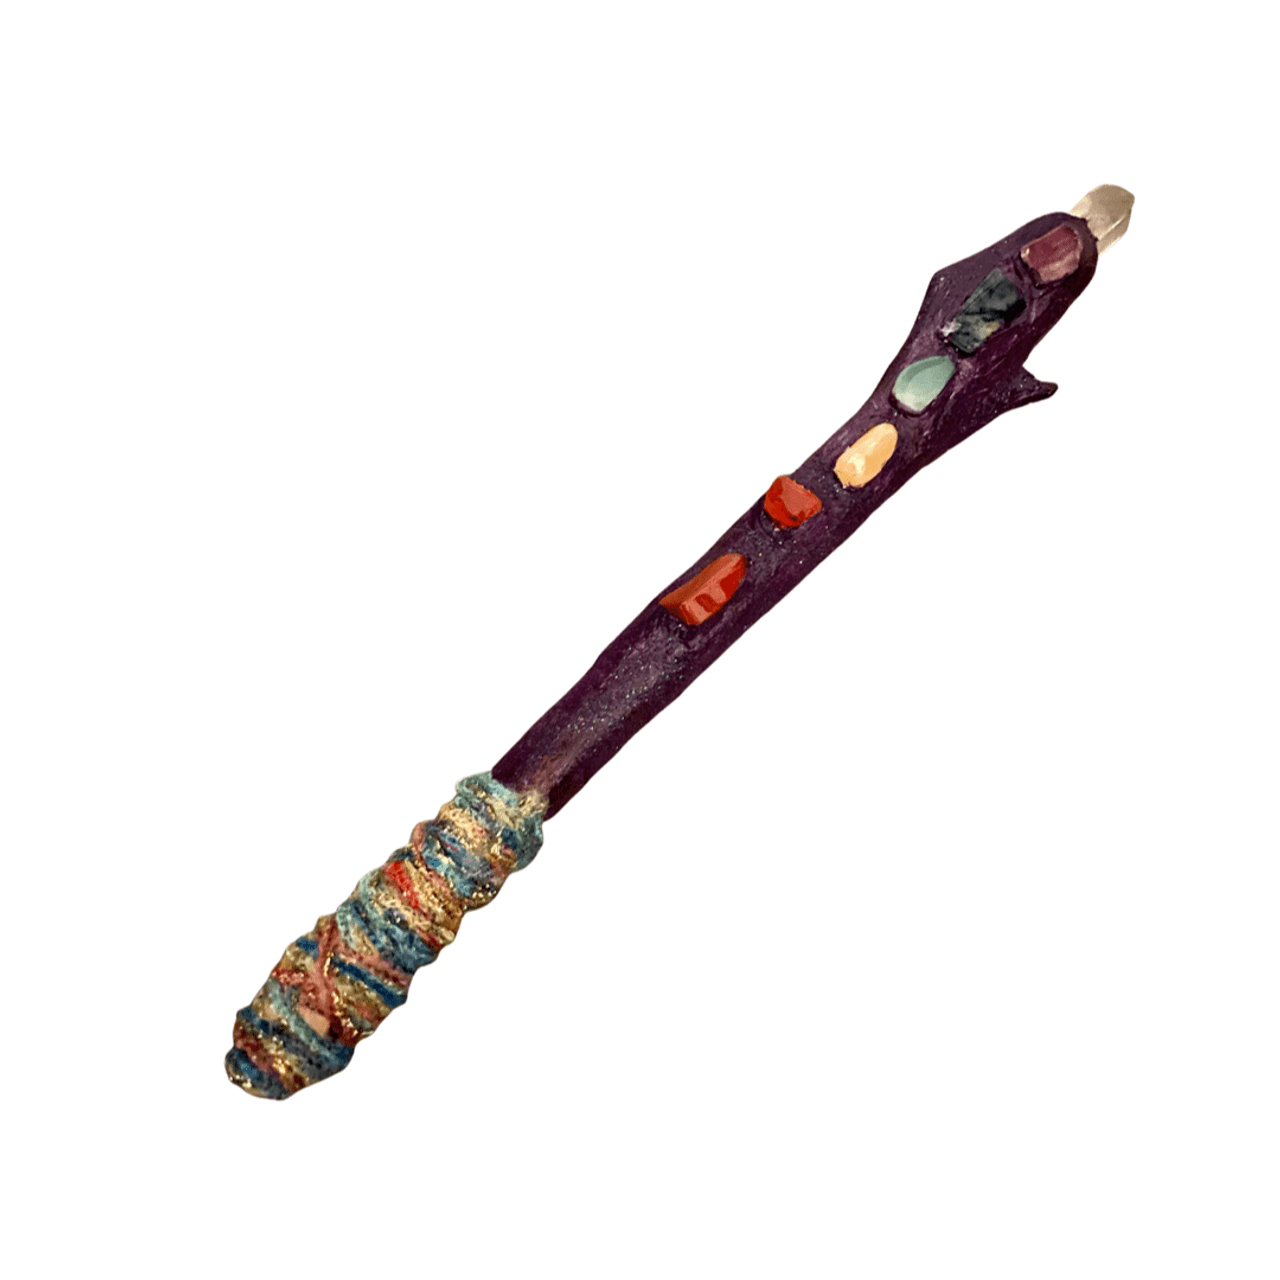 Chakra Crystal Wand with Triquetra Wax Seal